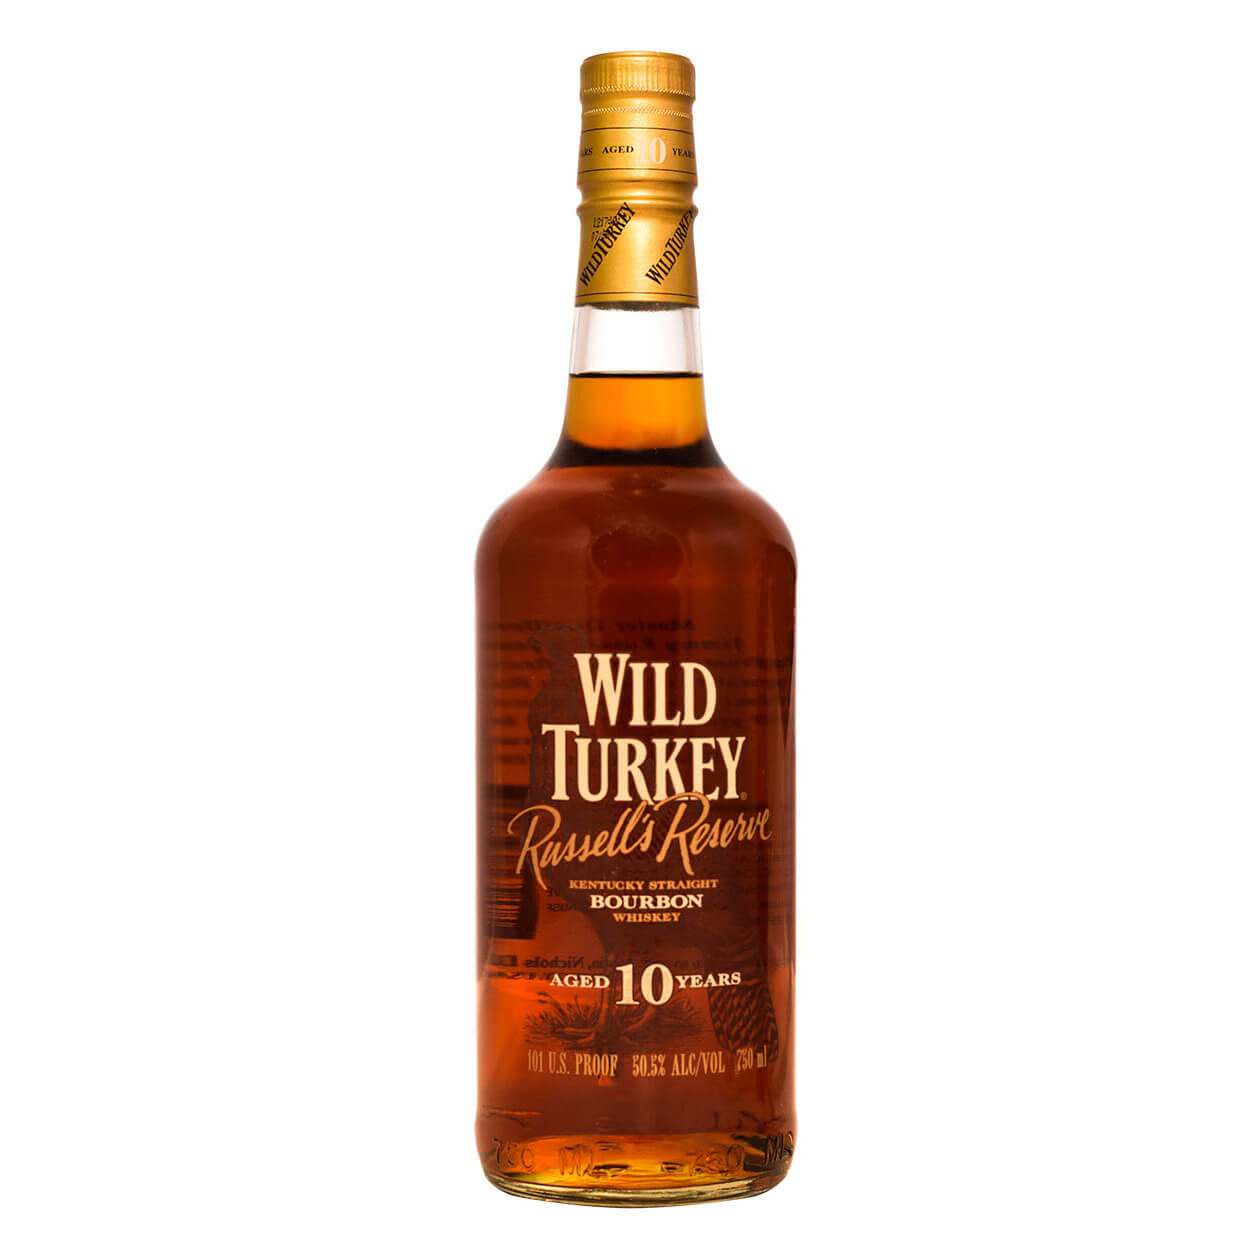 Wild Turkey Russell’s Reserve, bottled at 101 proof and produced between 2001 and 2005.